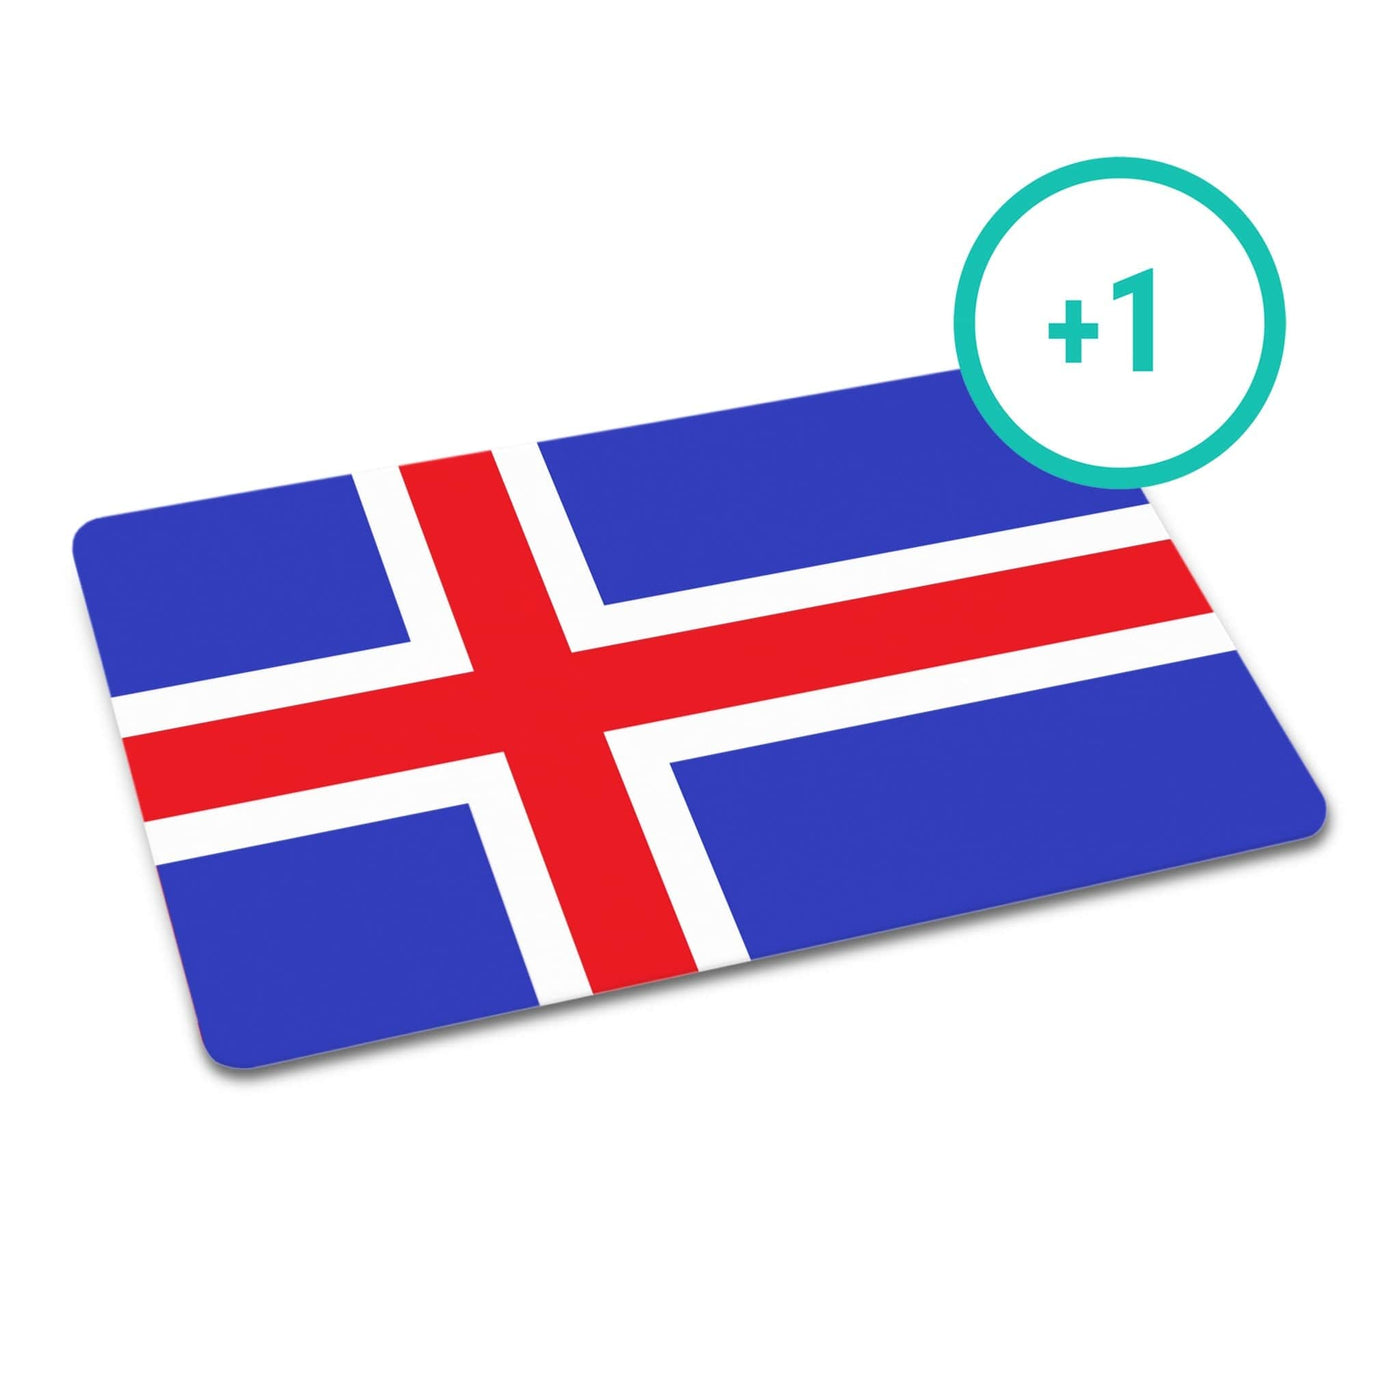 Additional Customized Card: Icelandic (Leave in cart to purchase)